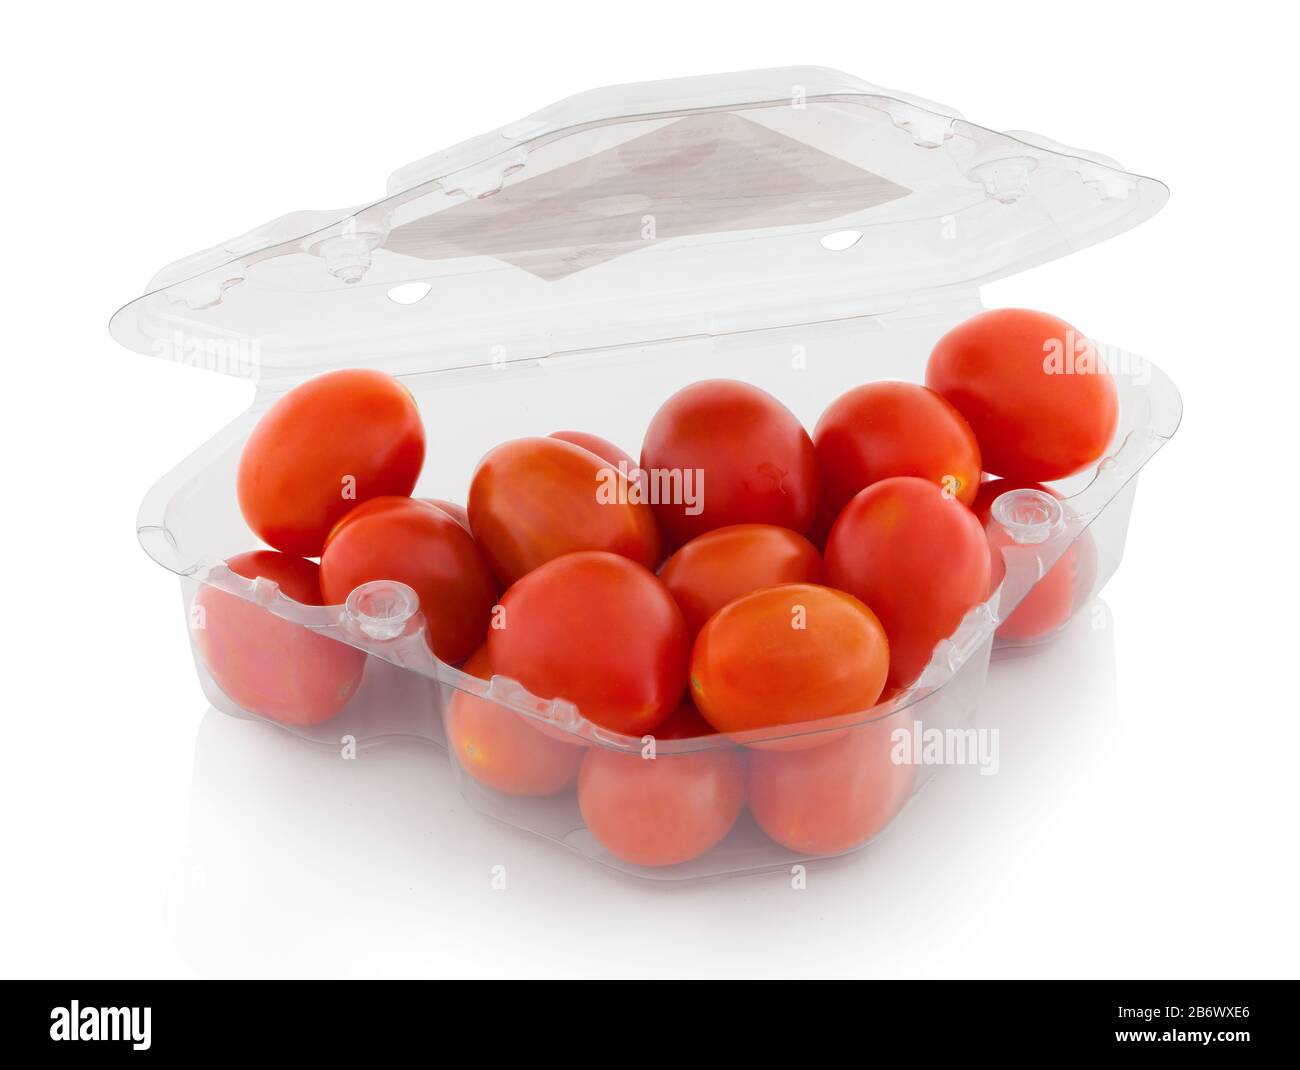 Cherry tomatoes from the shop in plastic box. Small tomatoes from supermarket in transparent pvc container. Isolated on white background with shadow r Stock Photo